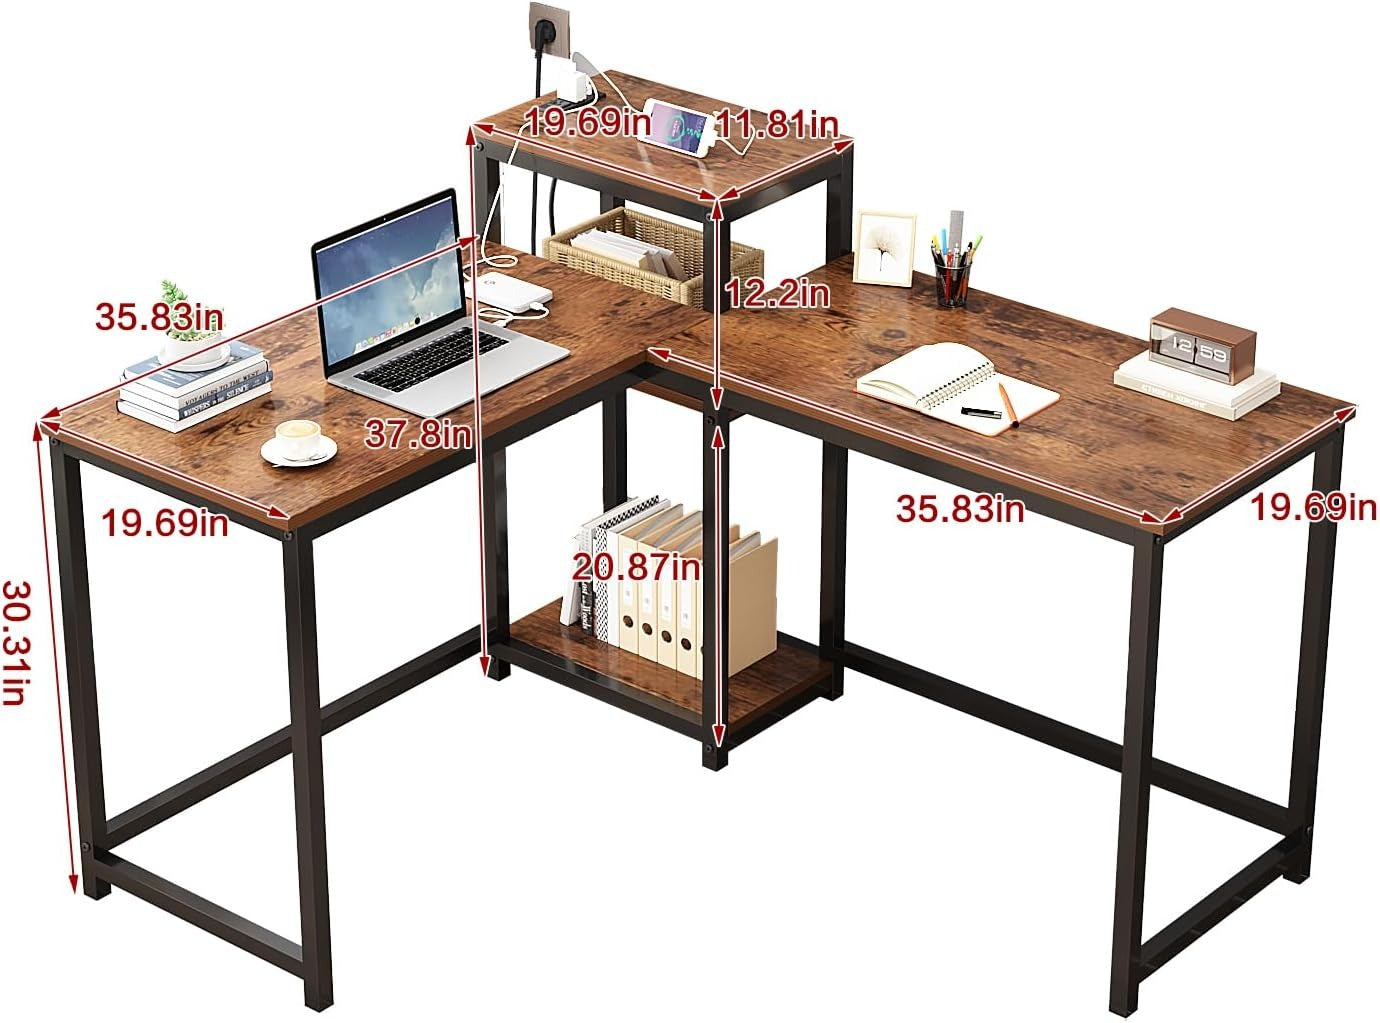 83 Inches Two Person Desk with Power Outlet rustic style size introduction